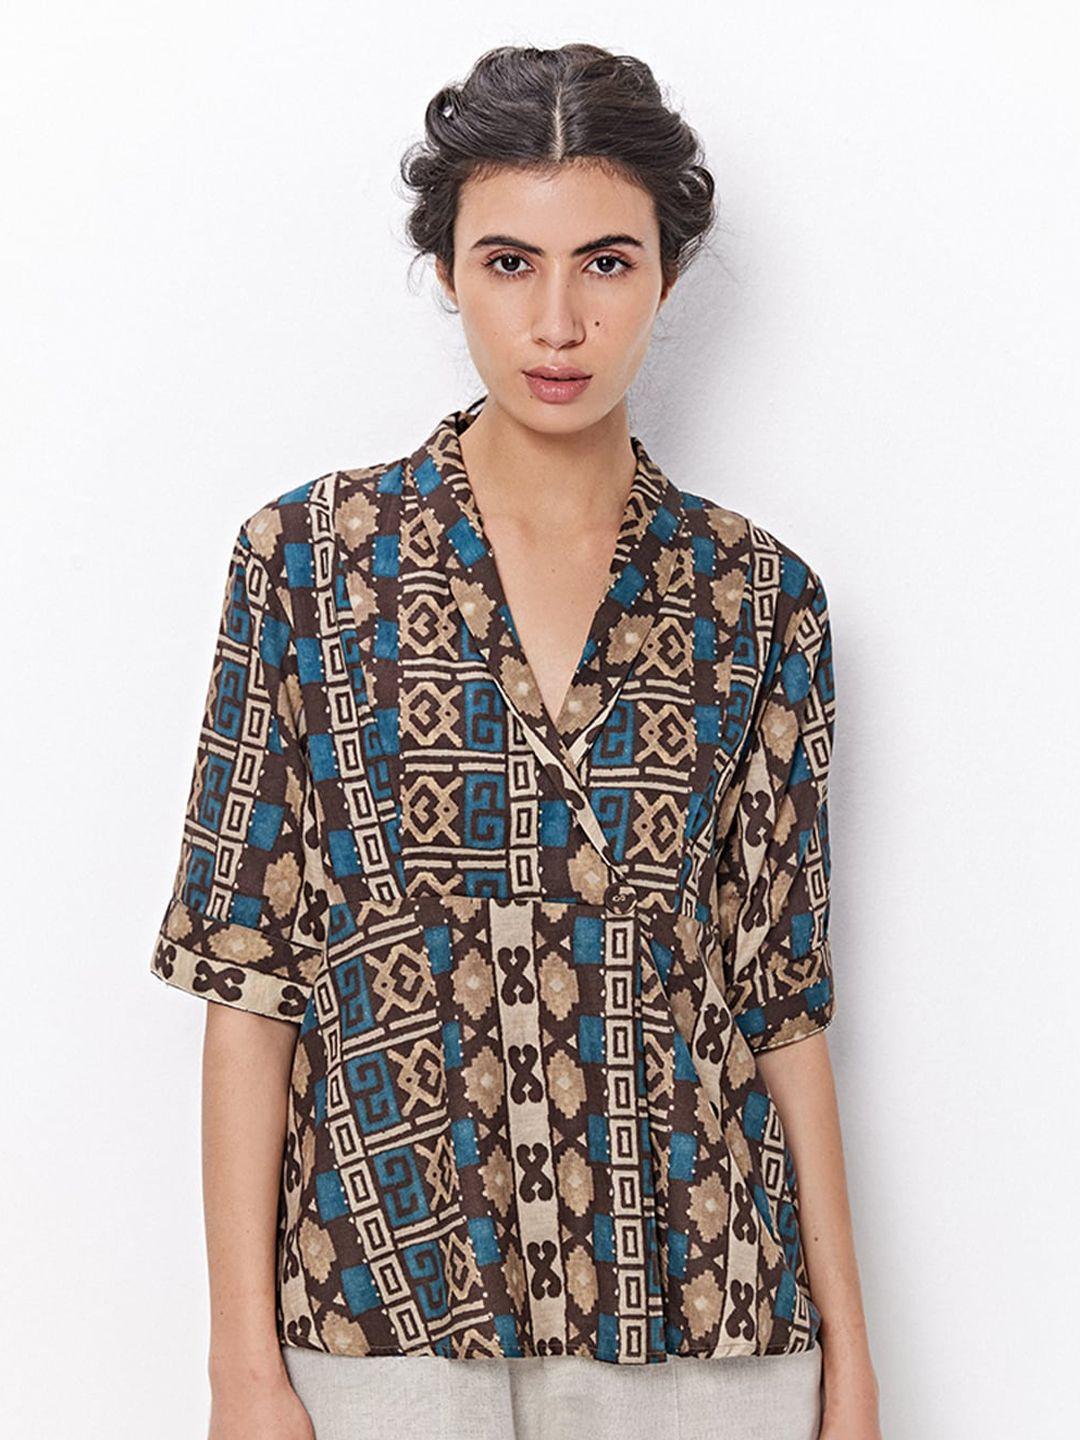 ancestry brown print cotton shirt style top